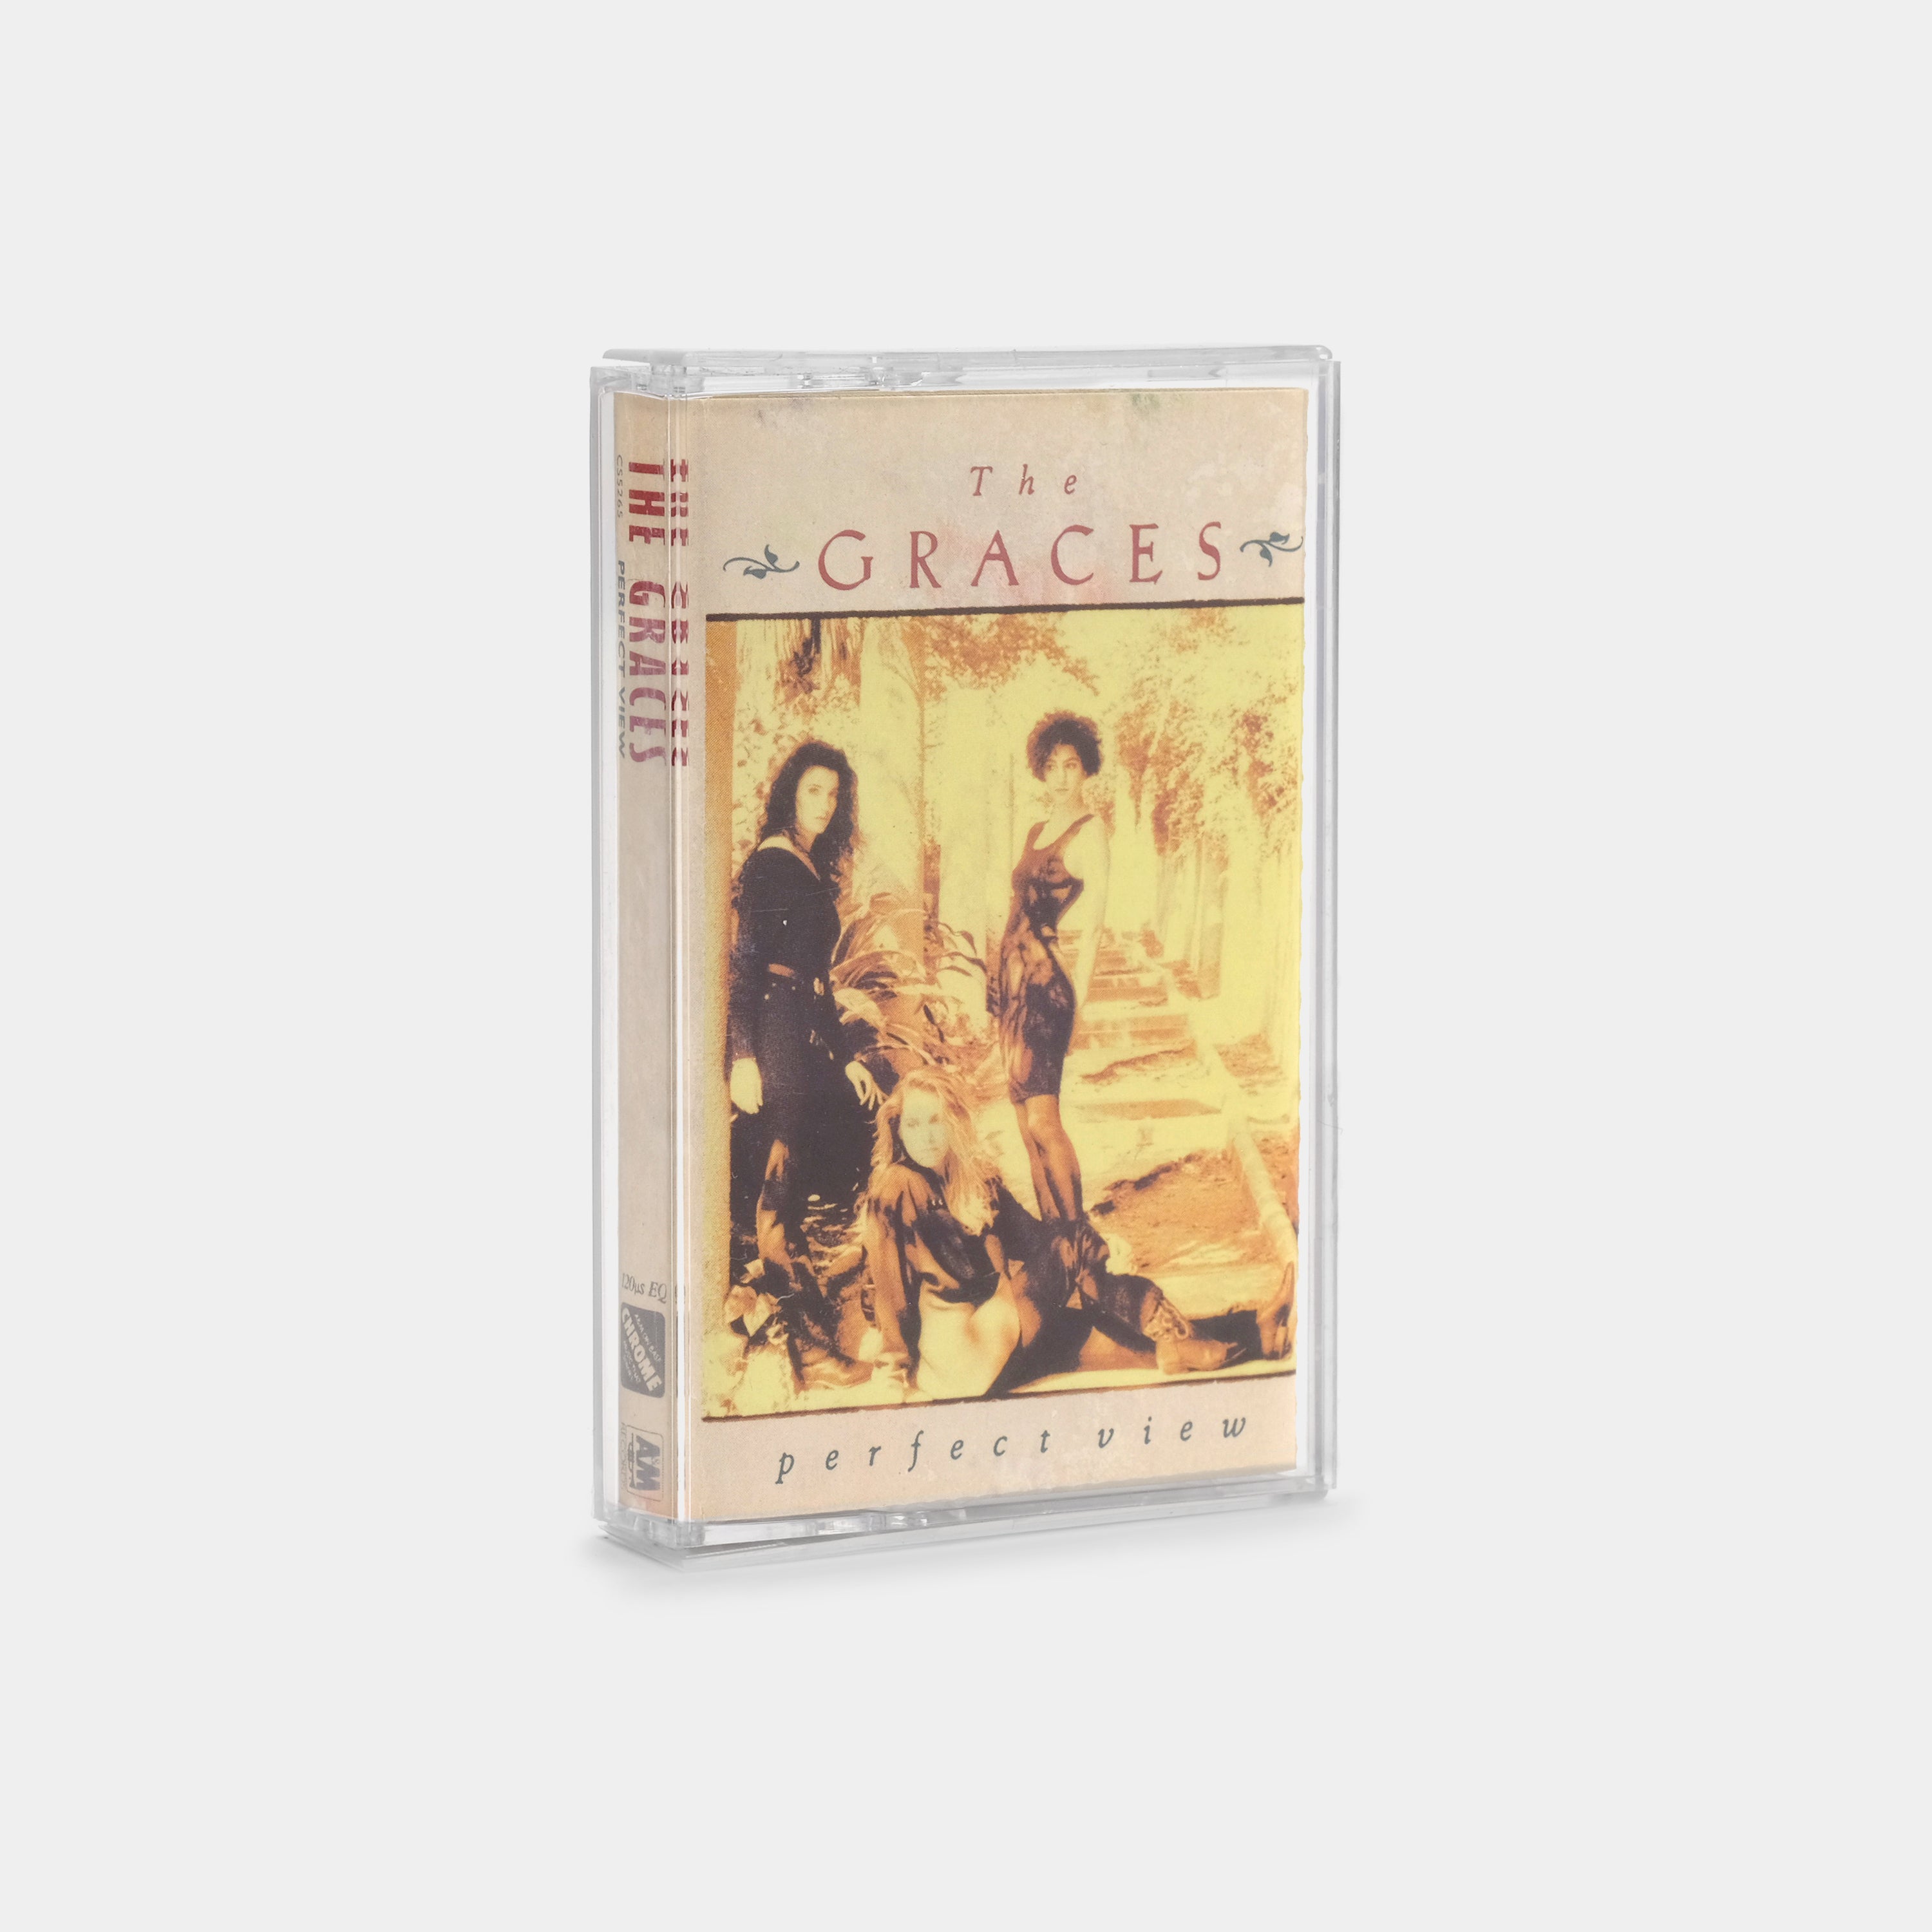 The Graces - Perfect View Cassette Tape